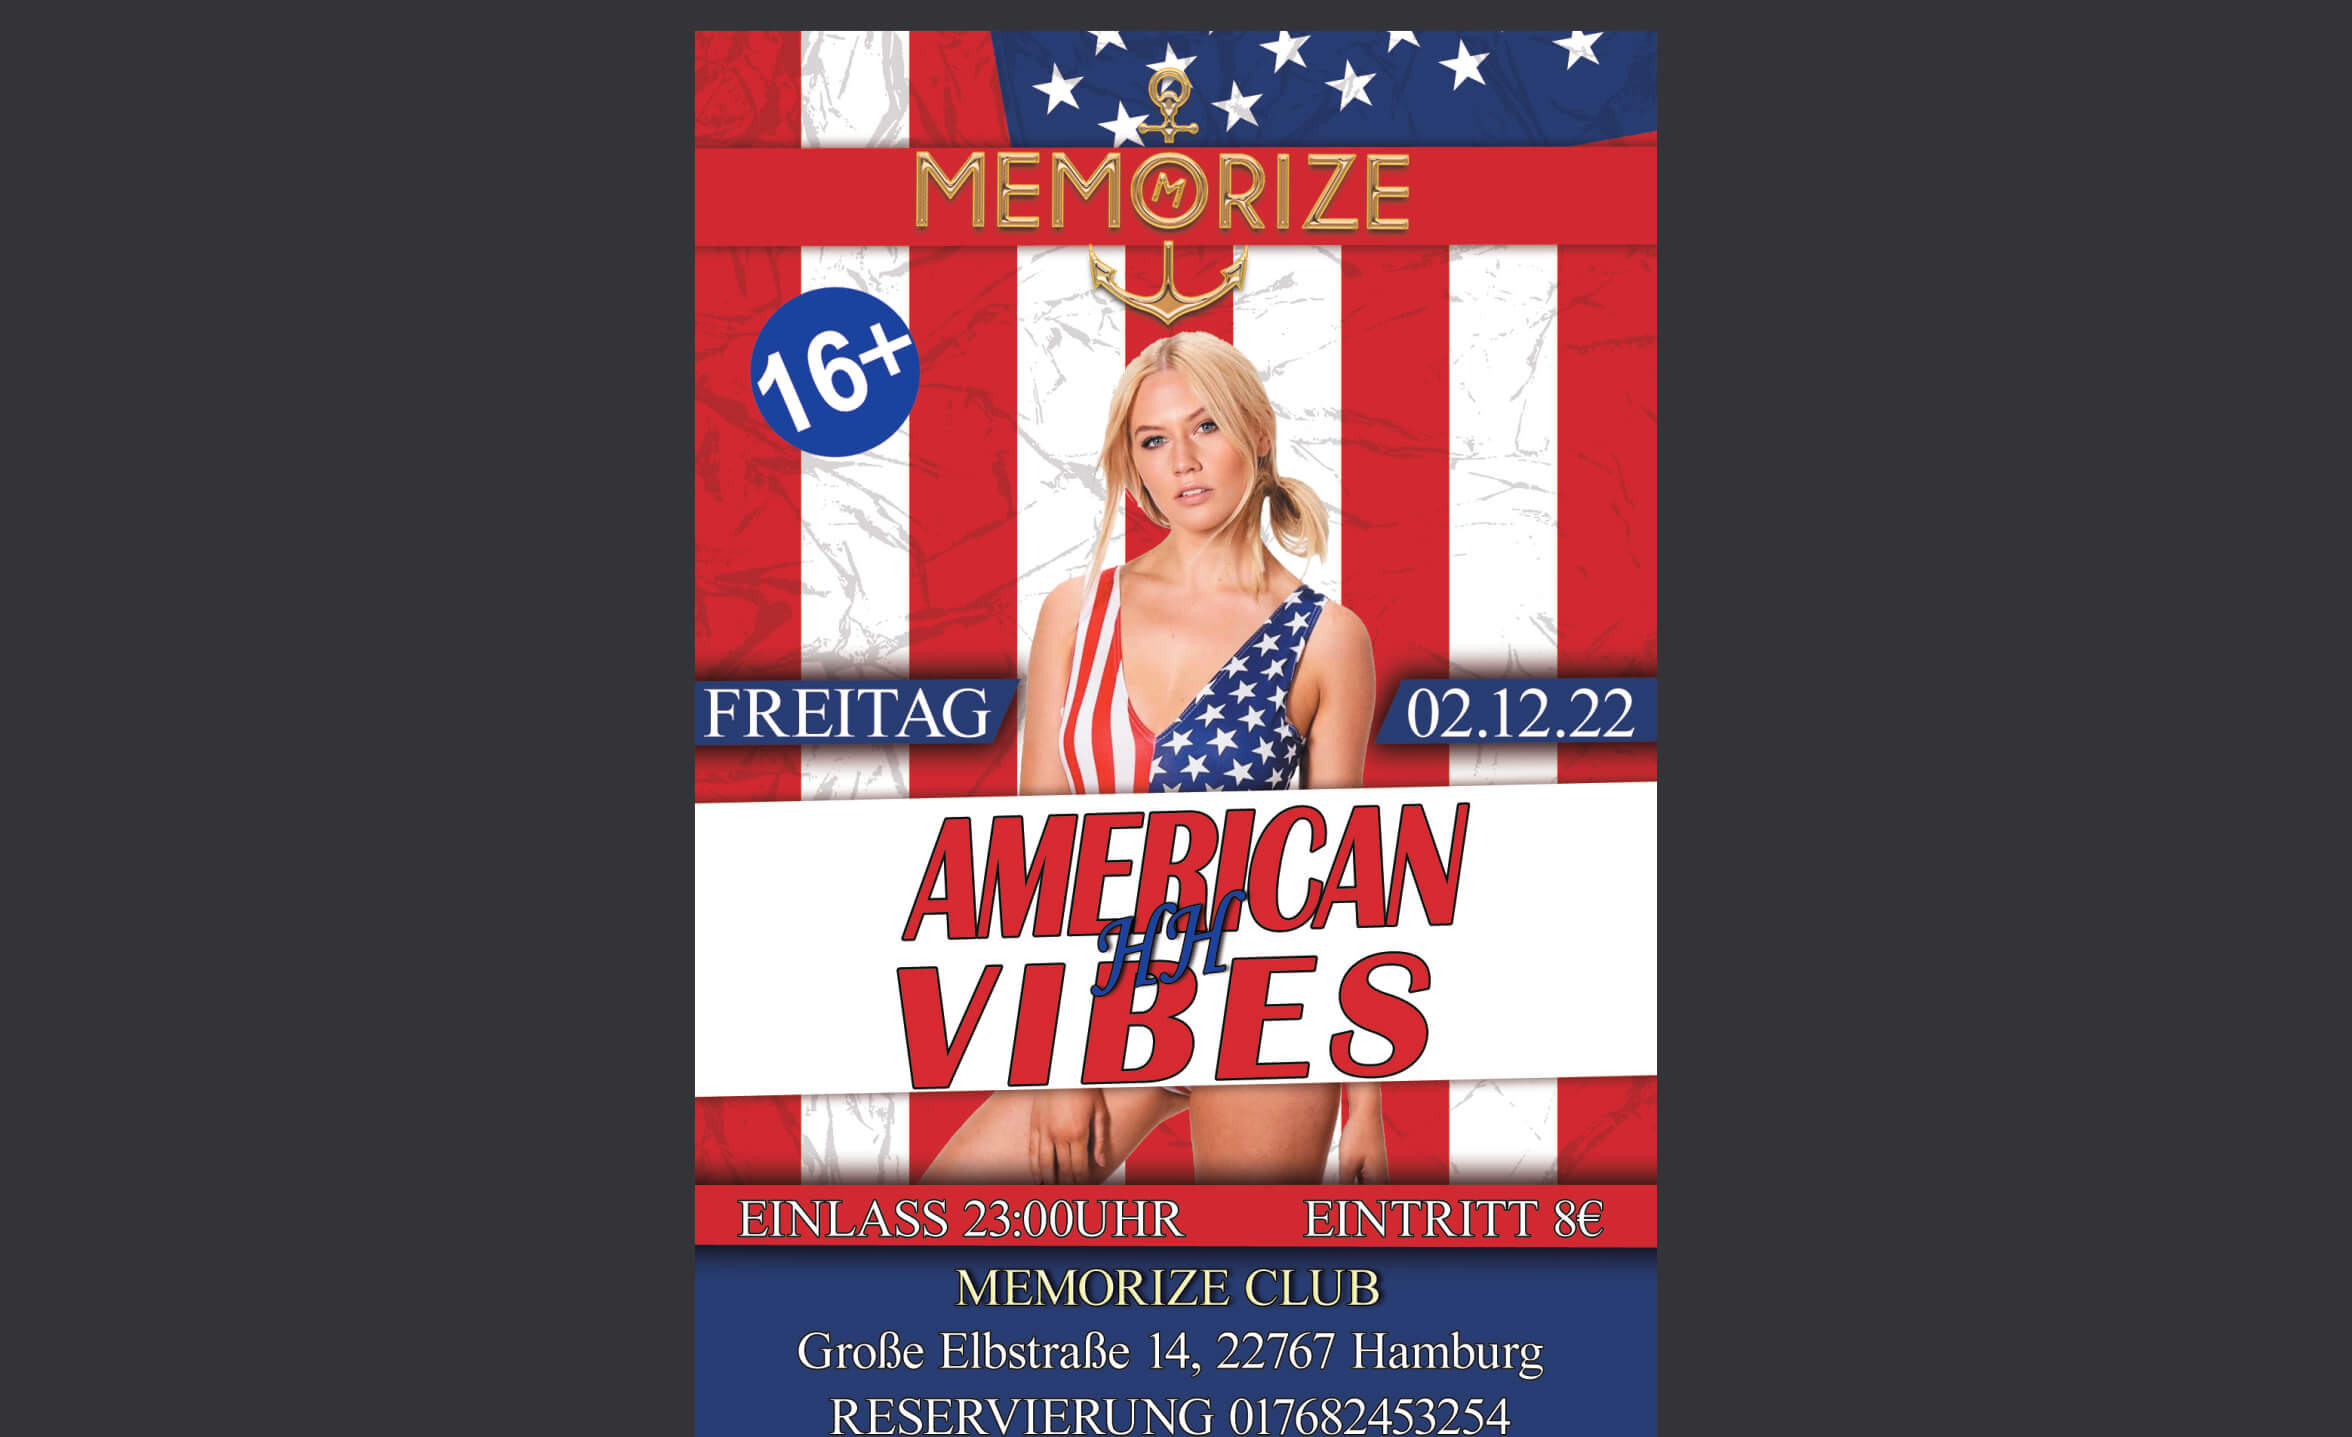 Event-Image for 'American vibes HH'